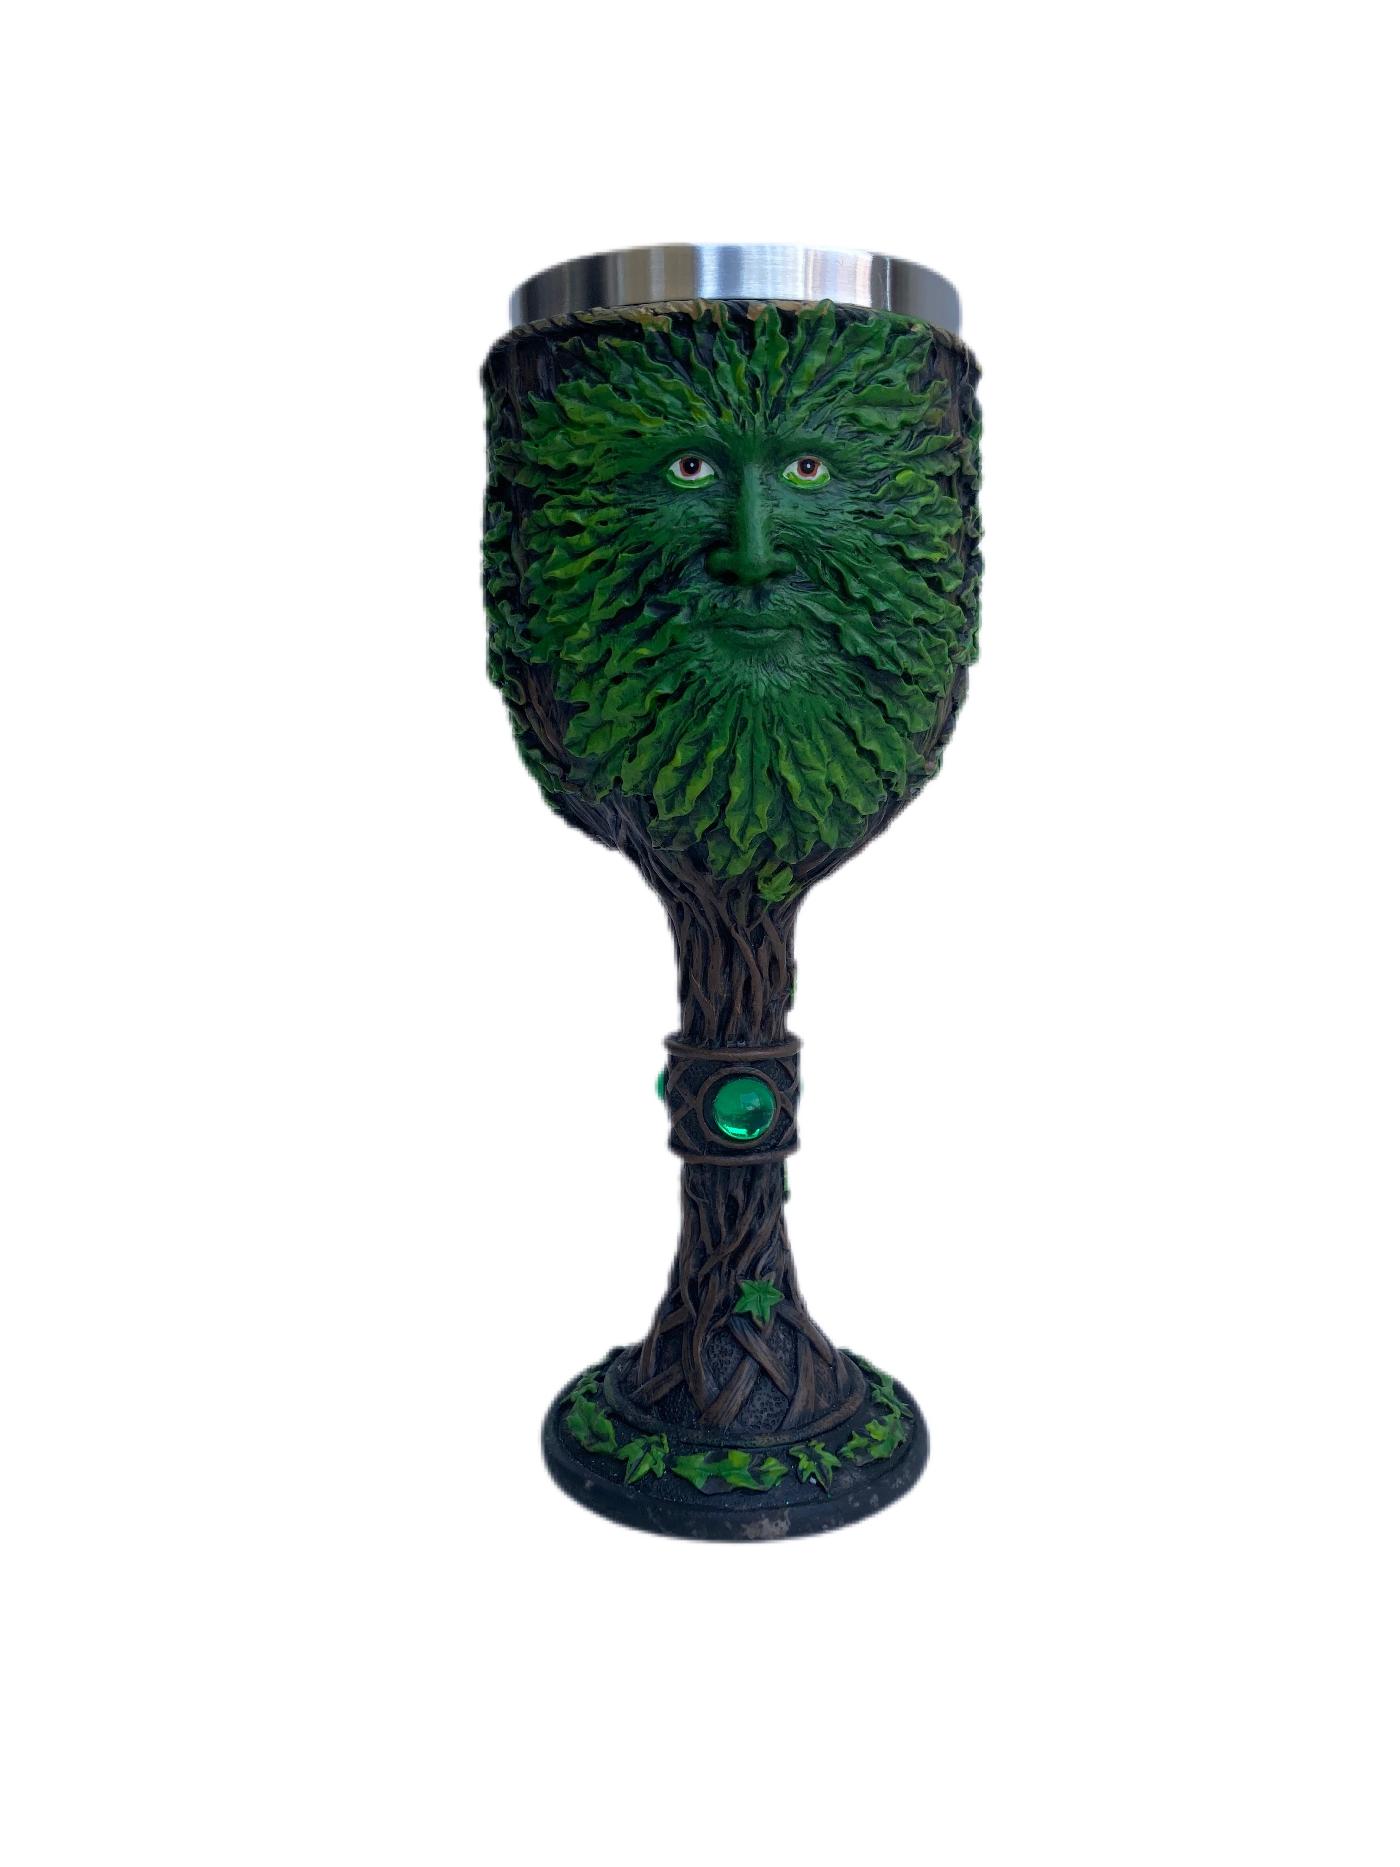 The Green man chalice / Goblet